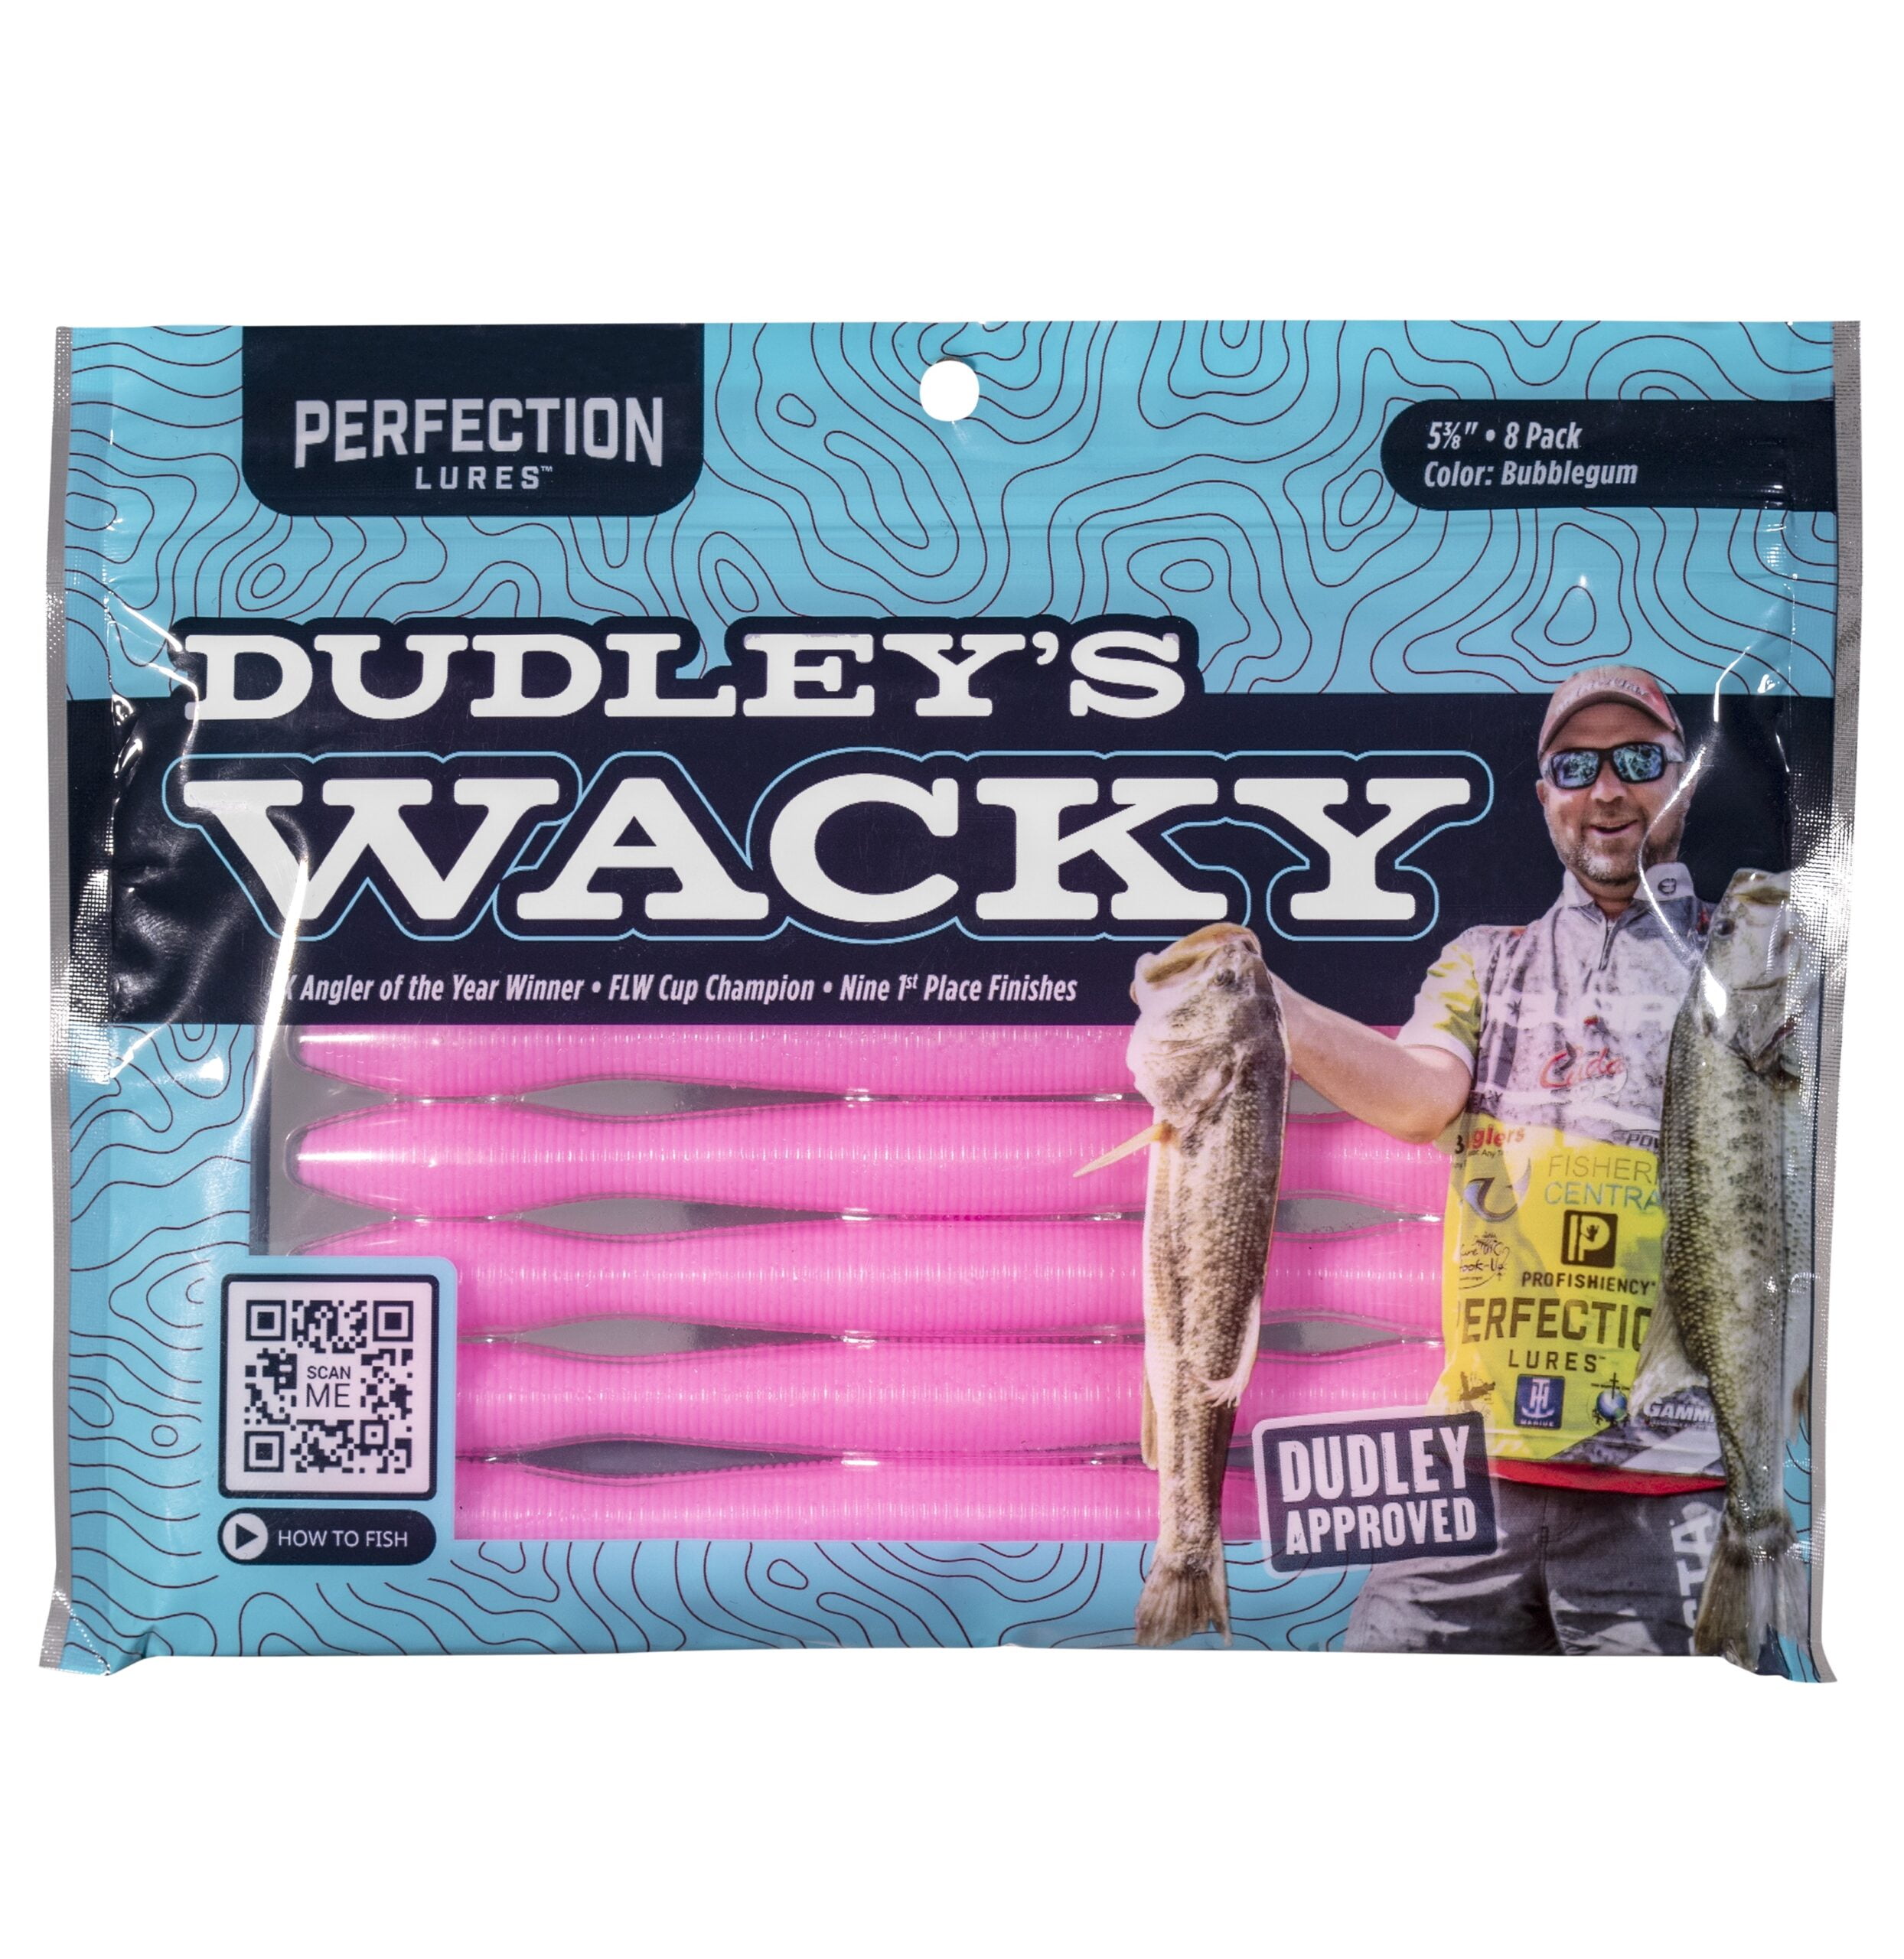 Perfection Lures Dudley's Pre-Rigged Wacky Worm Lures Kit, 13pc